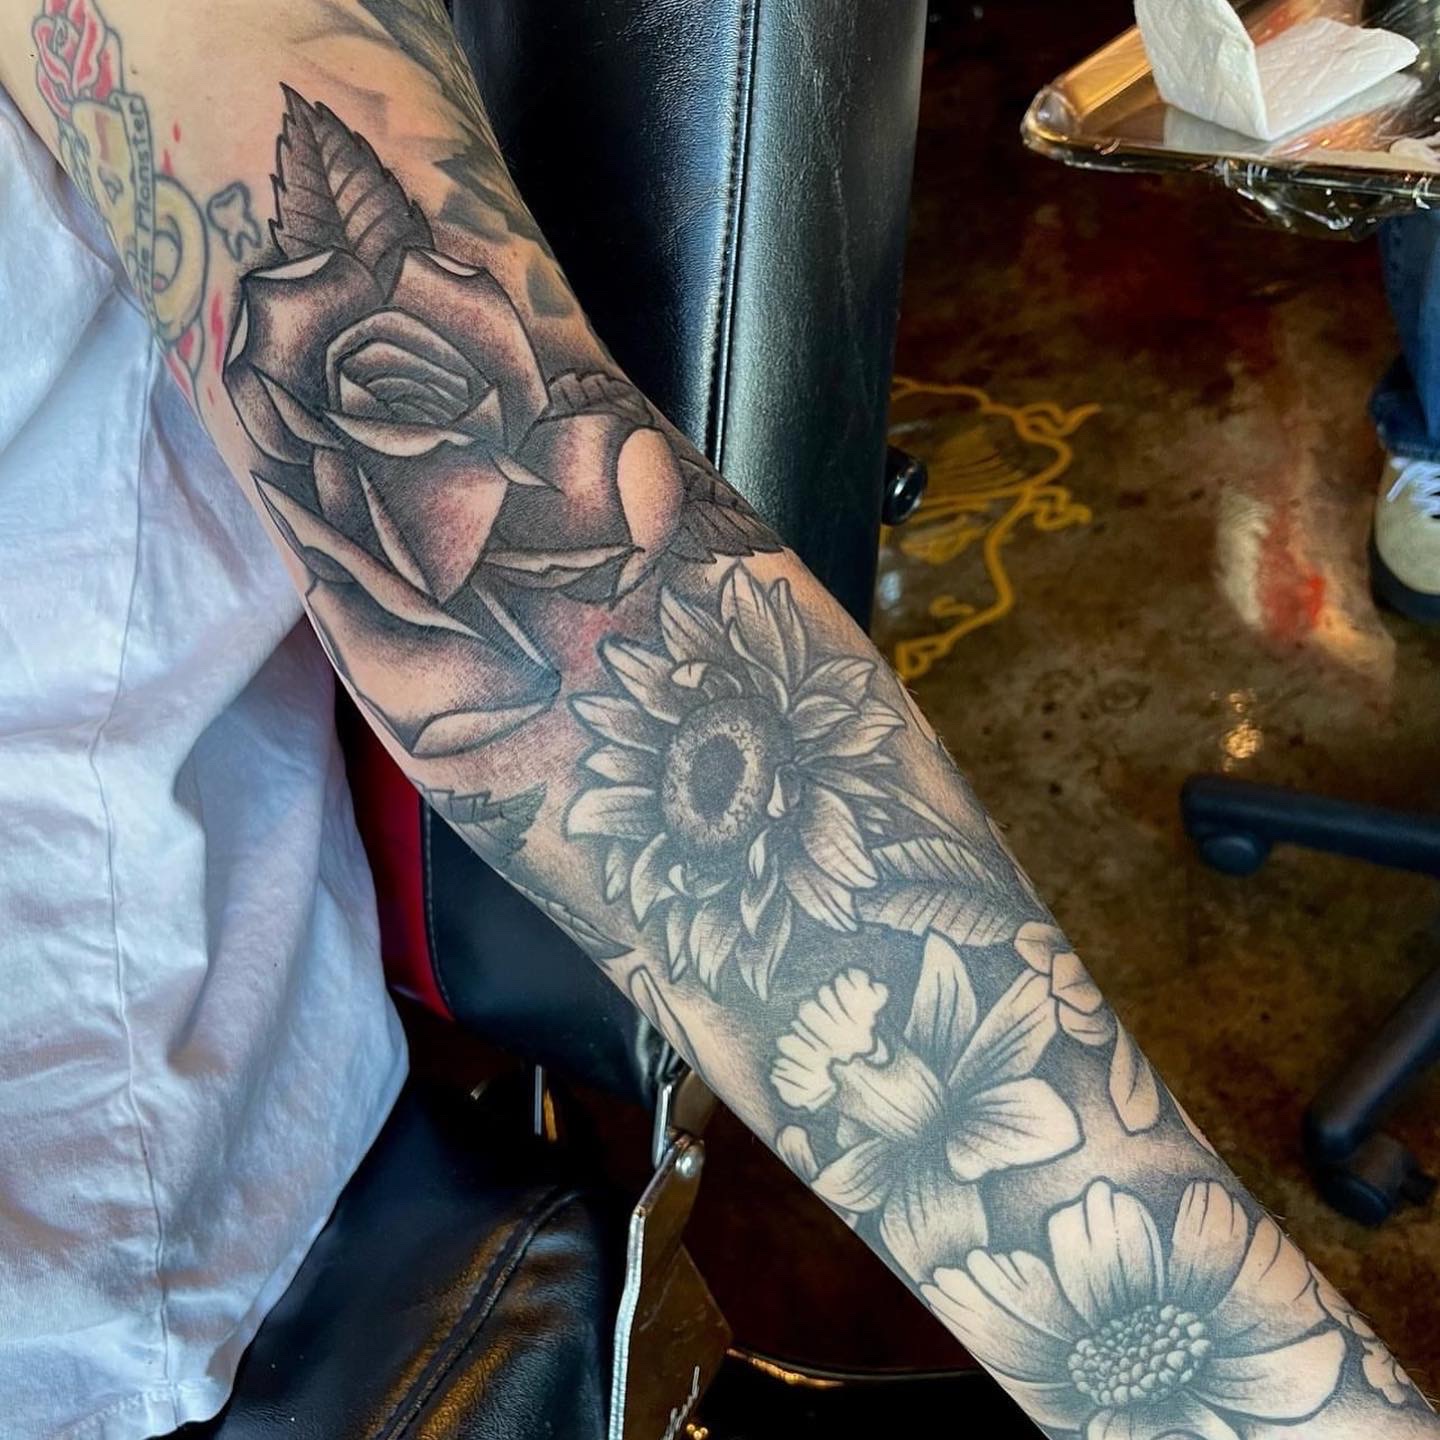 Tattoo of flowers on a arm from Dallas Tattoo shop